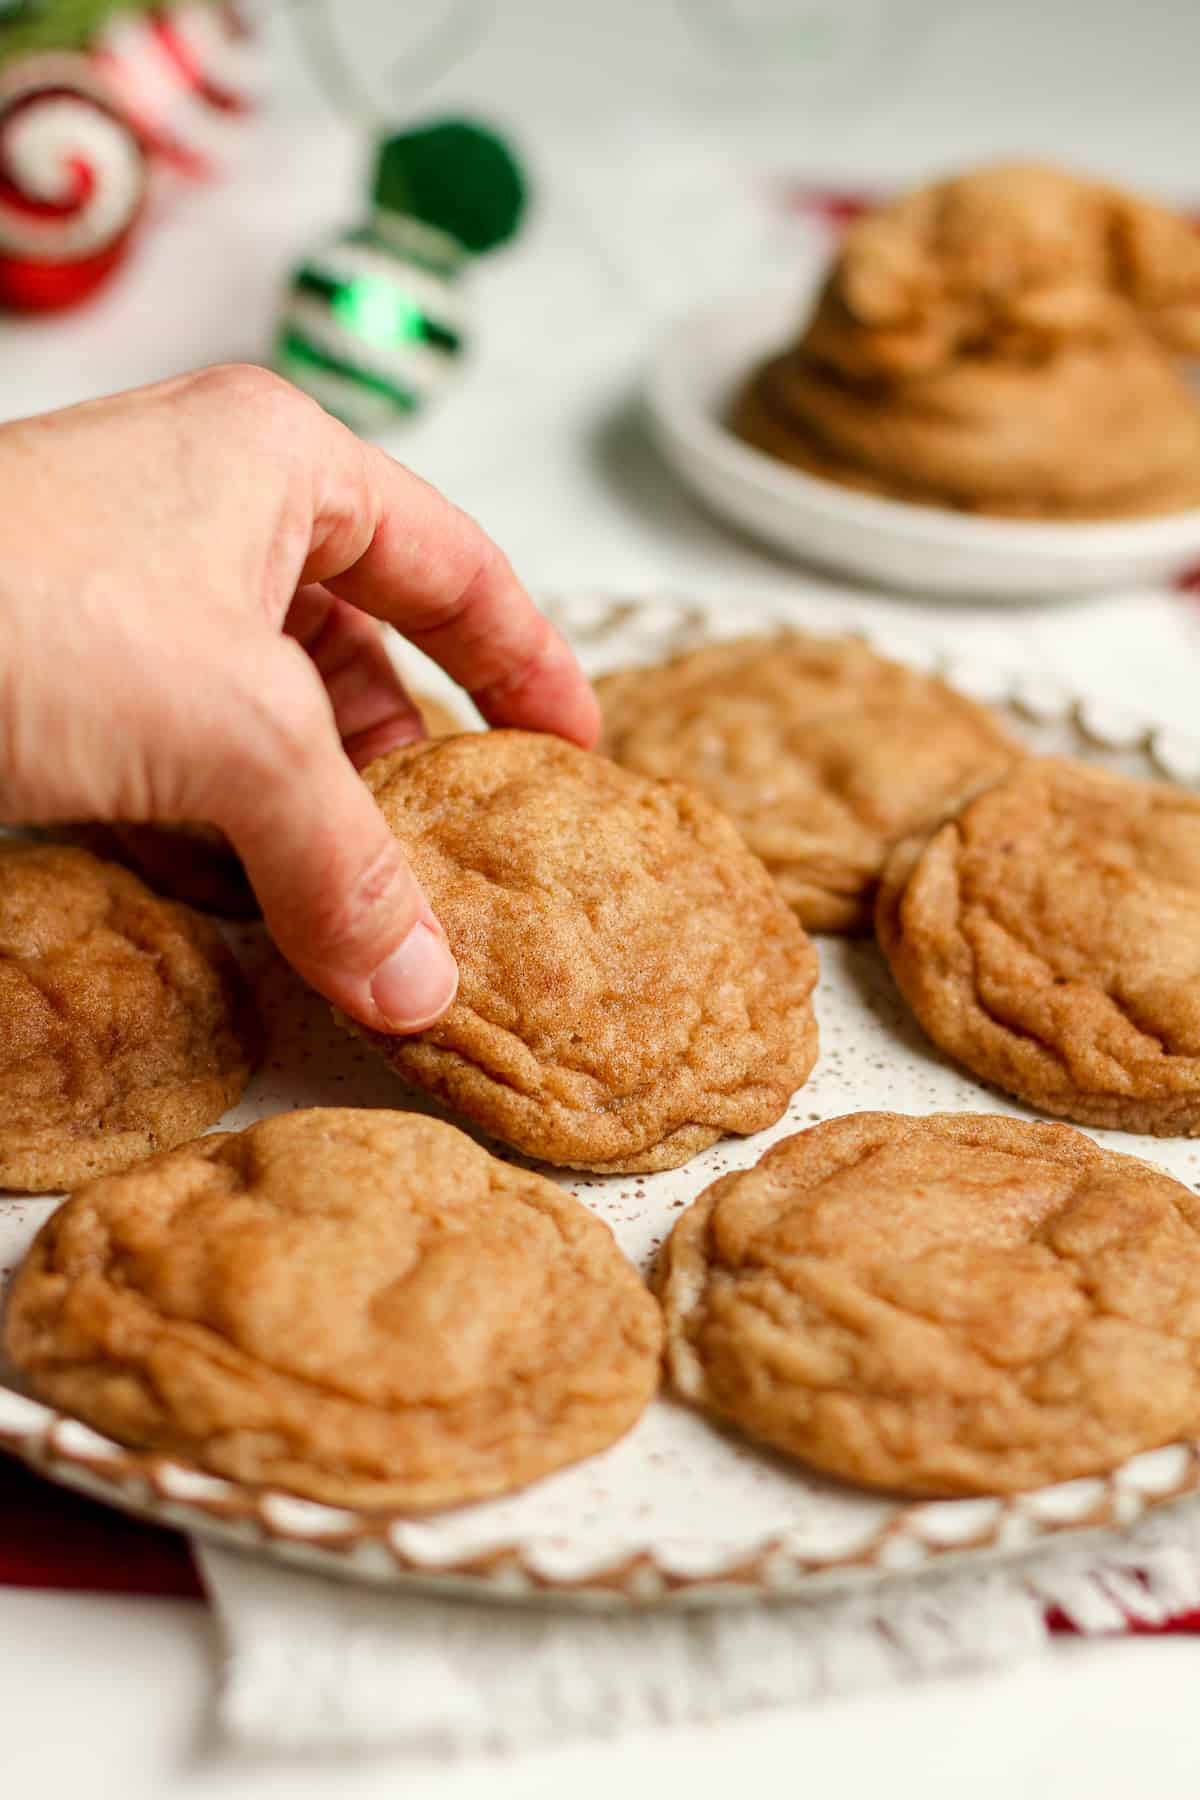 Side view of a plate of snickerdoodle cookies, with a hand lifting one up.